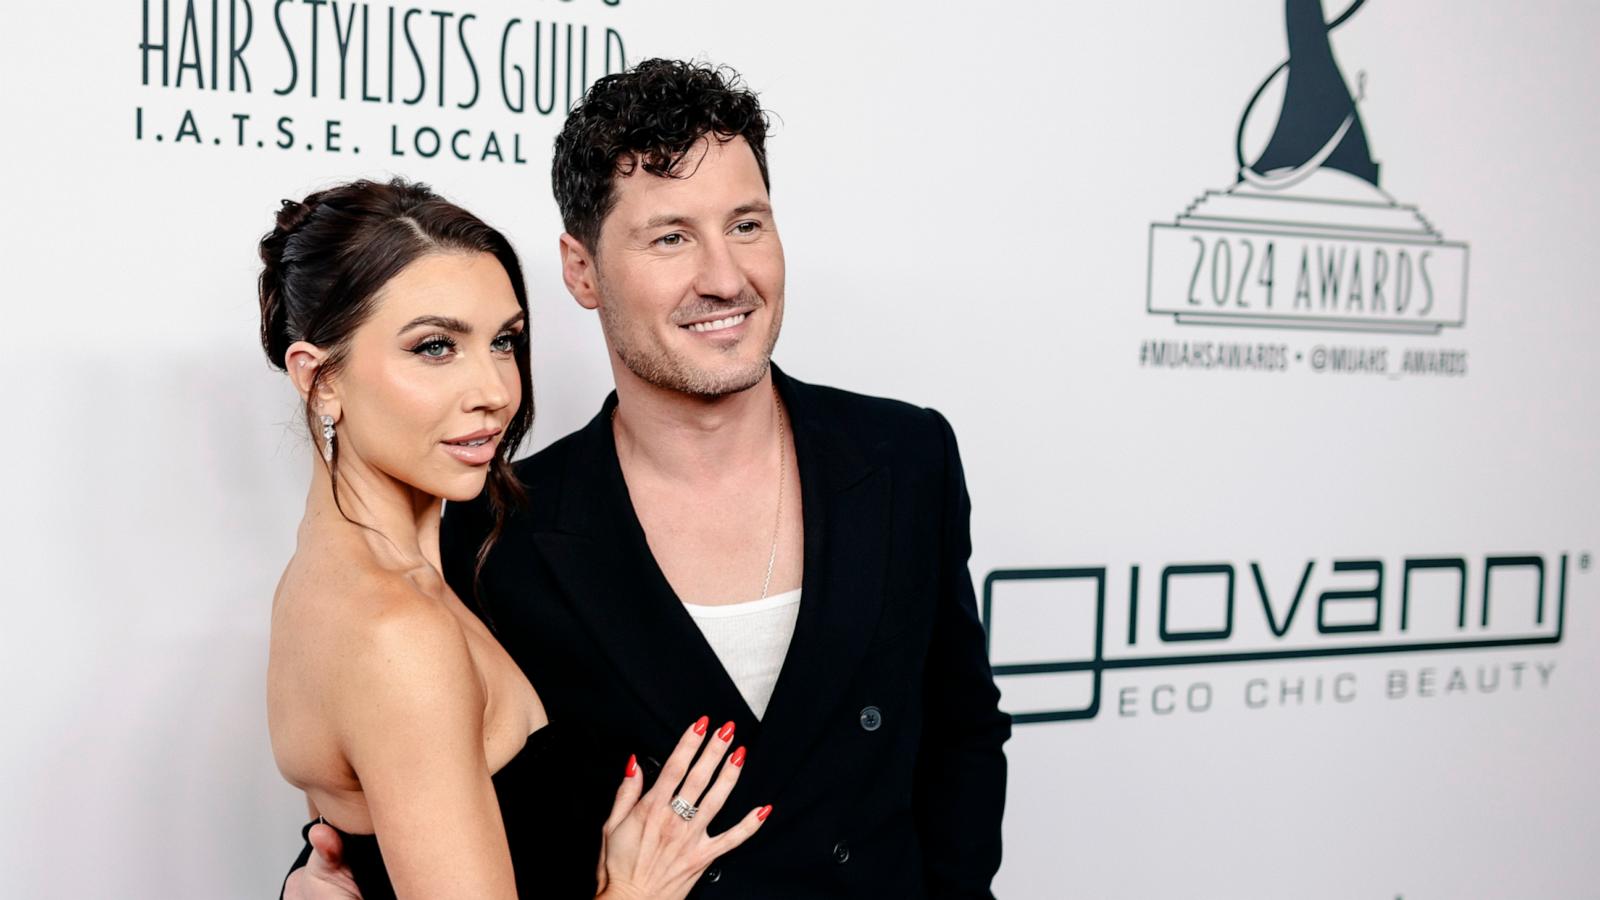 PHOTO: Jenna Johnson and Val Chmerkovskiy attend the 11th Annual MUAHS Awards at The Beverly Hilton on Feb. 18, 2024 in Beverly Hills, Calif.